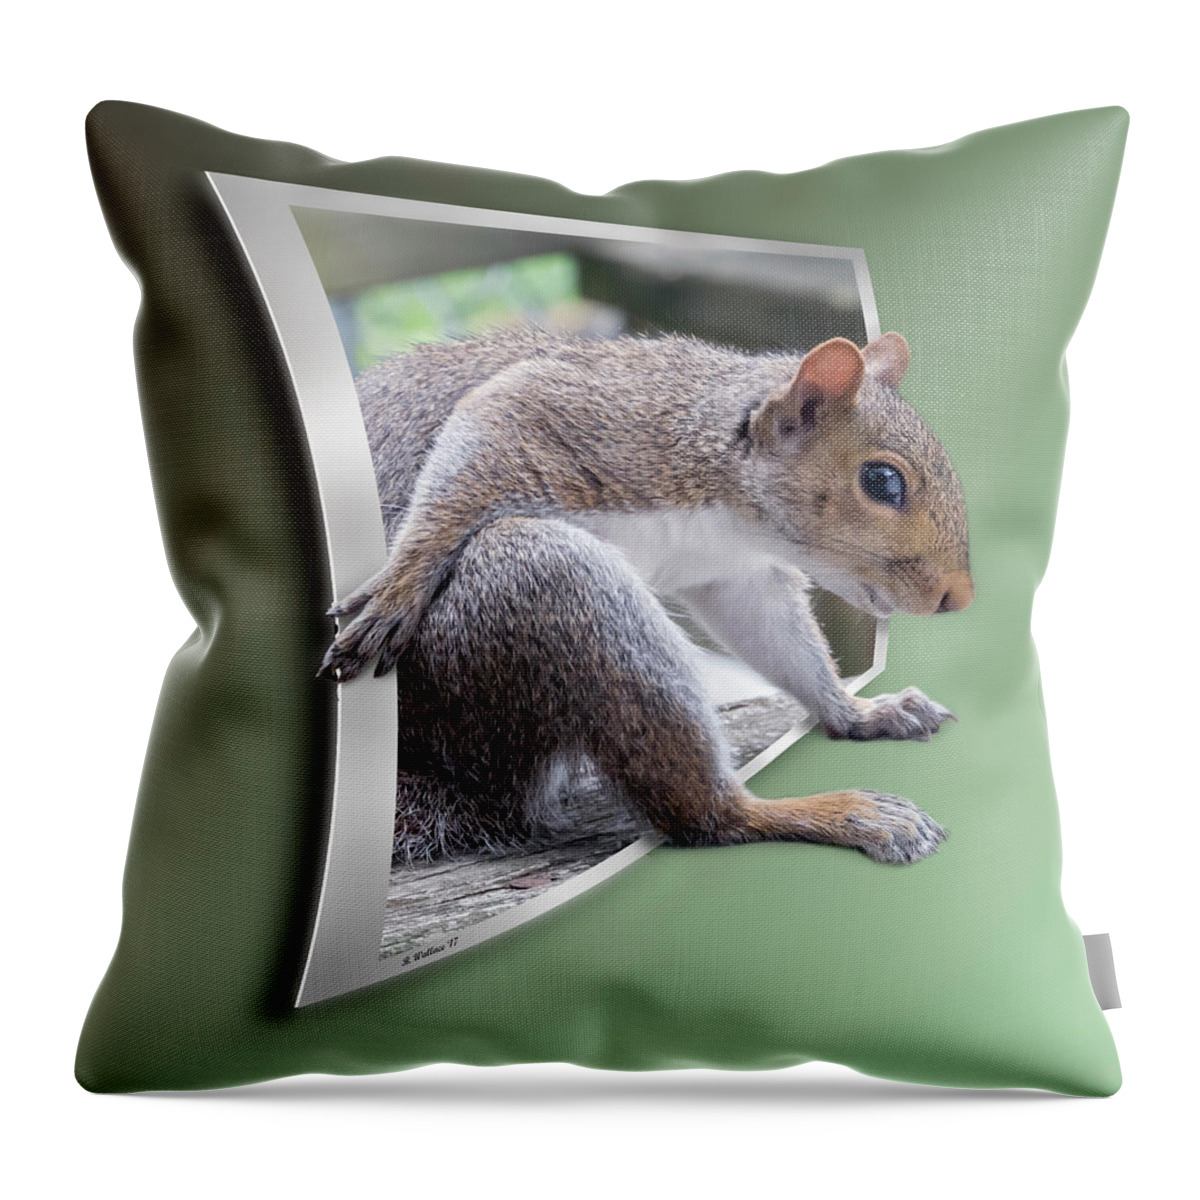 2d Throw Pillow featuring the photograph The Great Escape by Brian Wallace